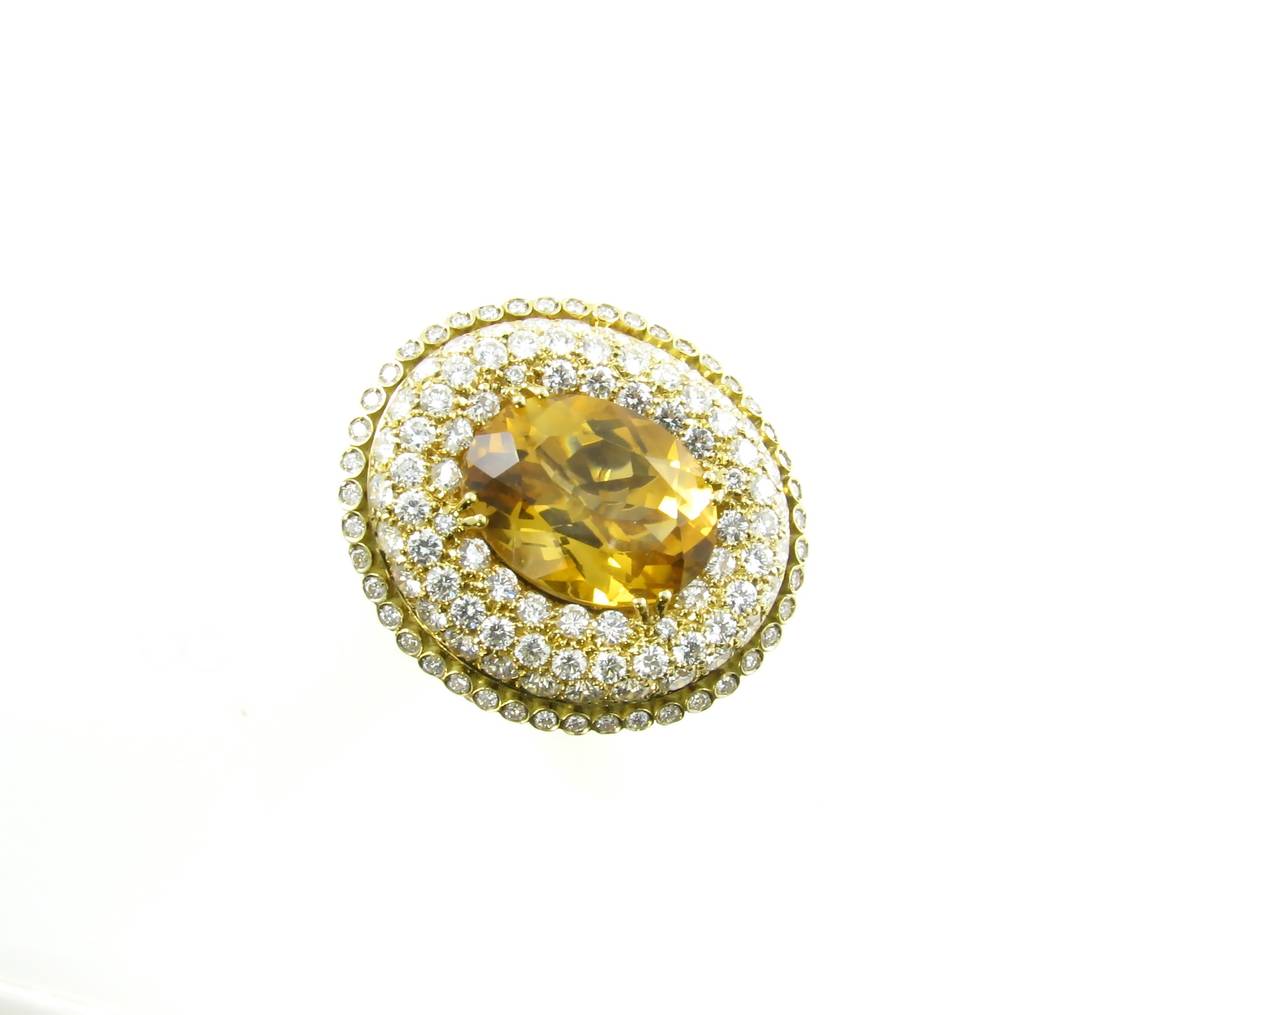 An 18 karat yellow gold, diamond, yellow sapphire and citrine ring, by Valente Milano, Italy, circa 1990s.  The ring is designed with a center oval faceted citrine set within a pave diamond surround with a collet set diamond border.  The 121 round